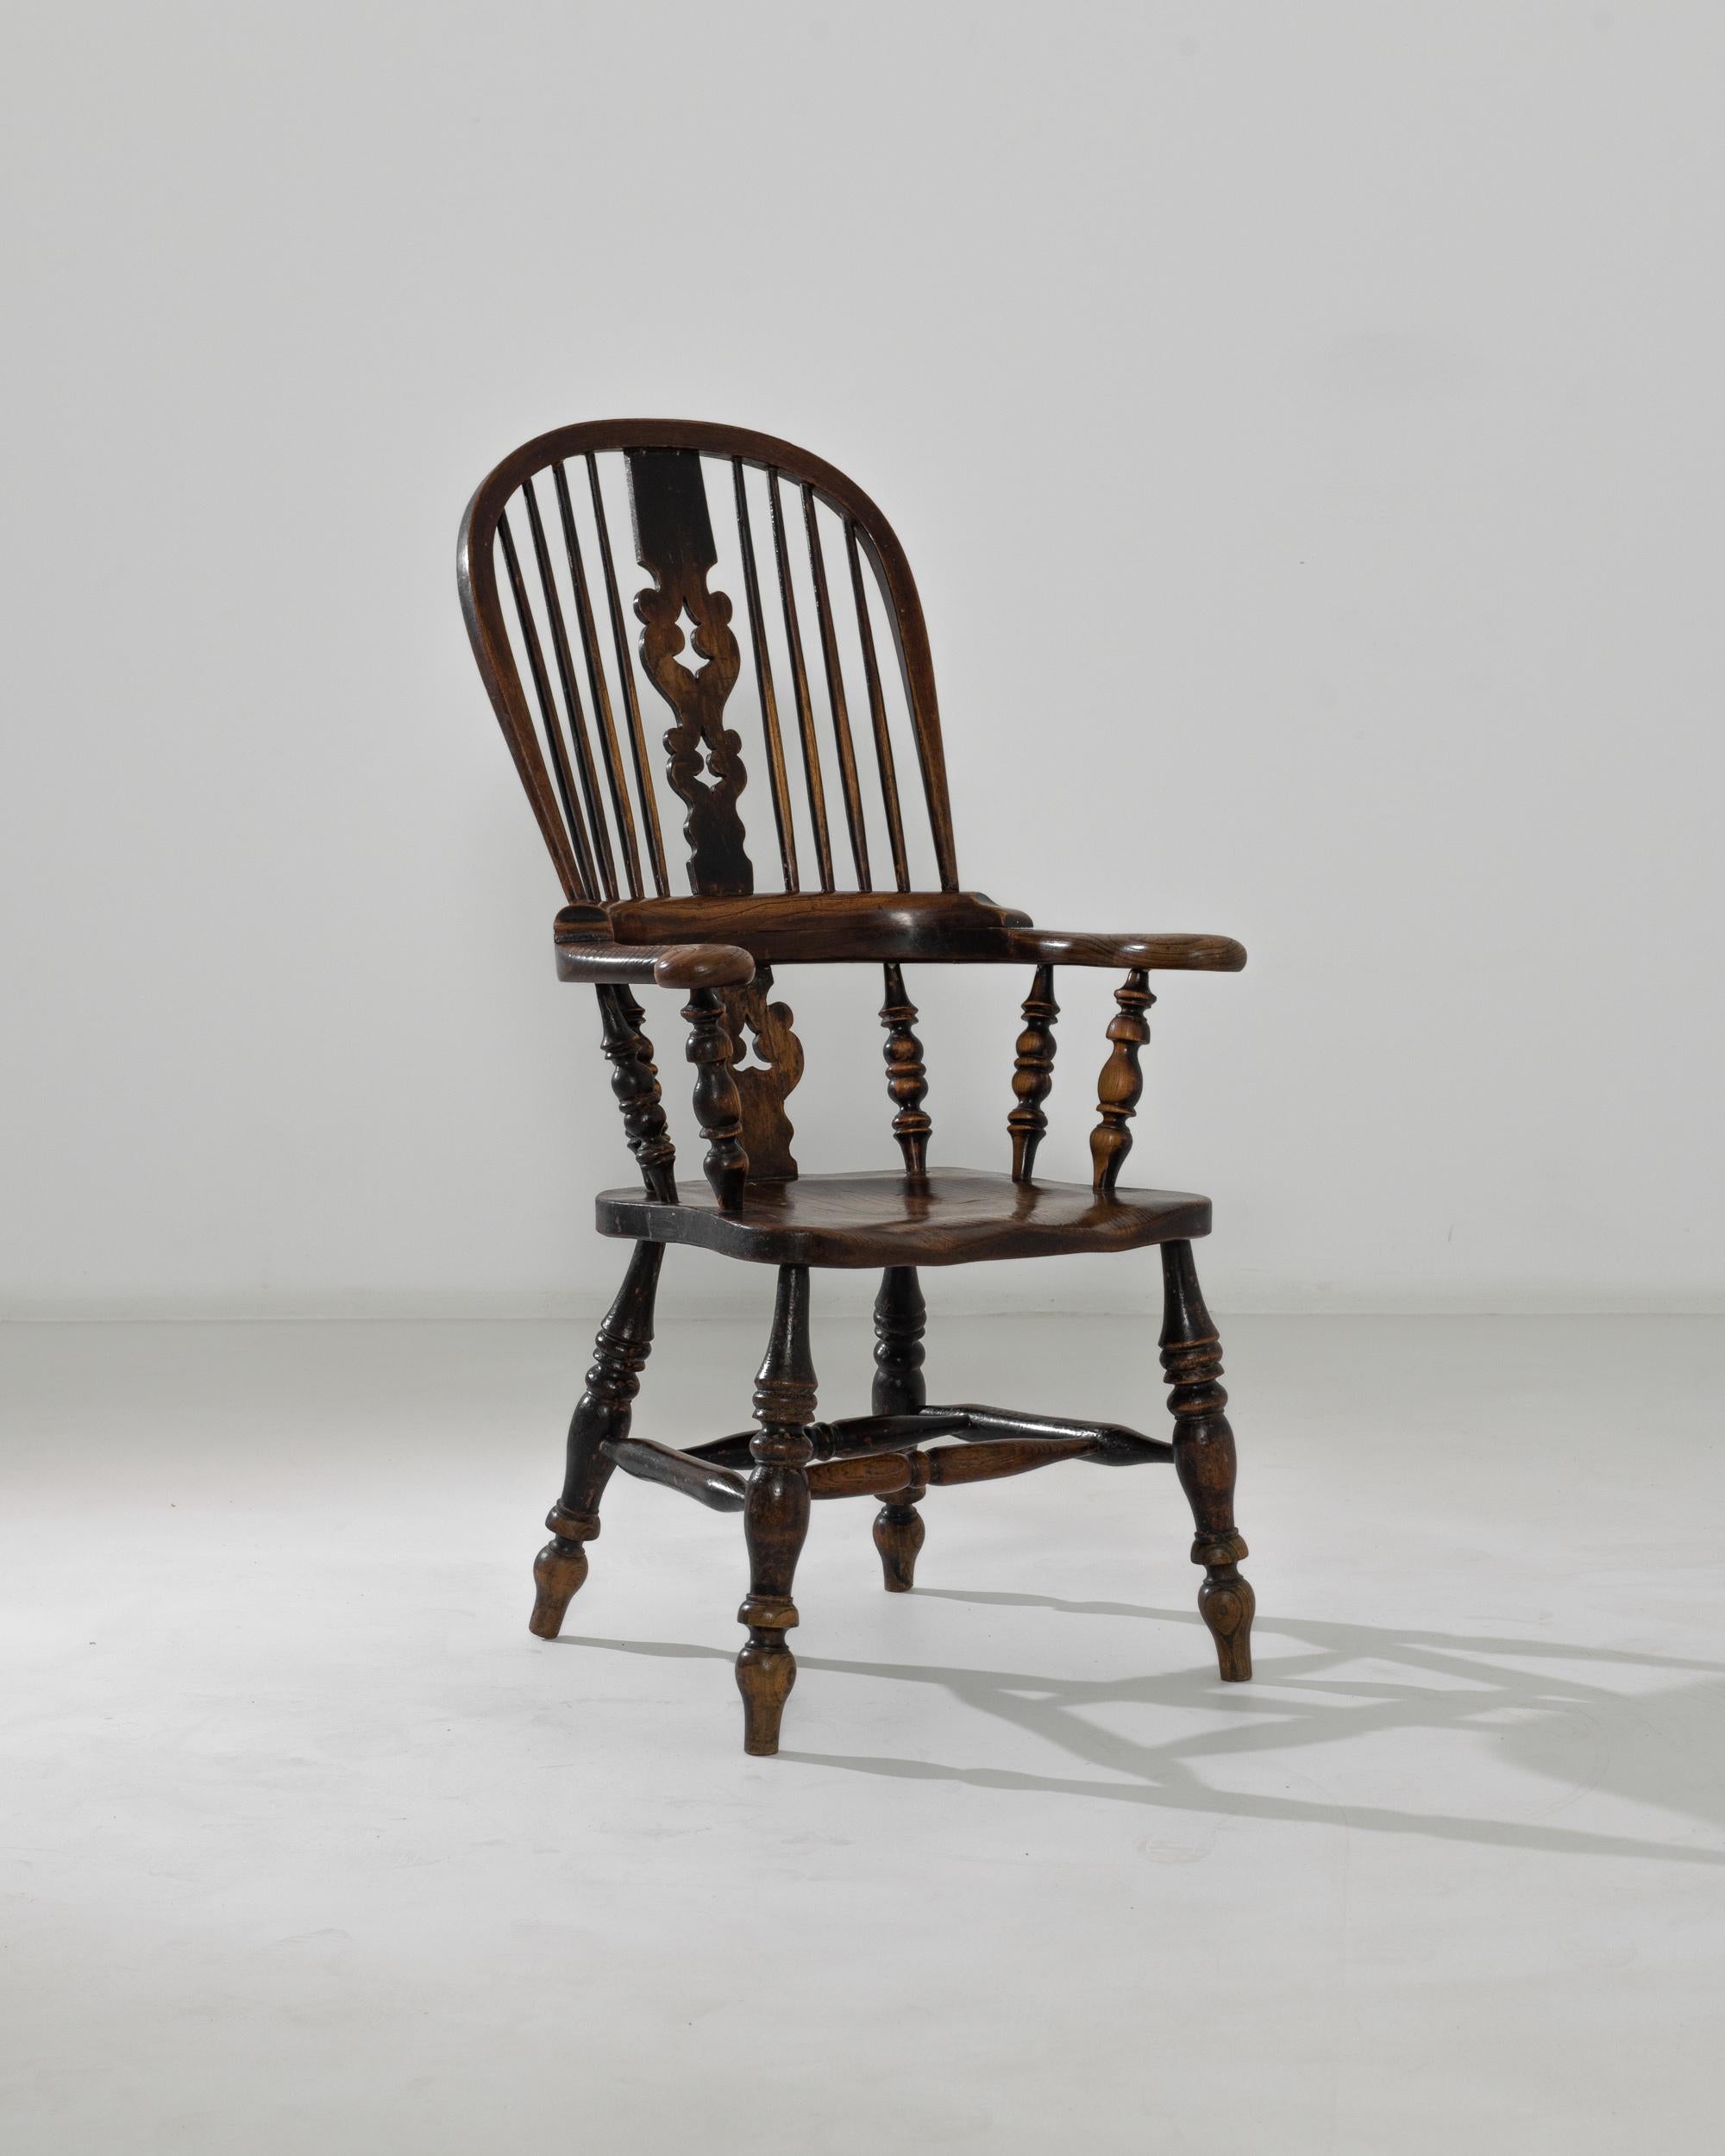 A hardwood ‘sack-back’ English Windsor armchair, circa 1850. Constructed with lathed arms and legs and spindles, this armchair leads the eye around its array of finely crafted details. Exhibiting the master’s attention to detail, indicative of the